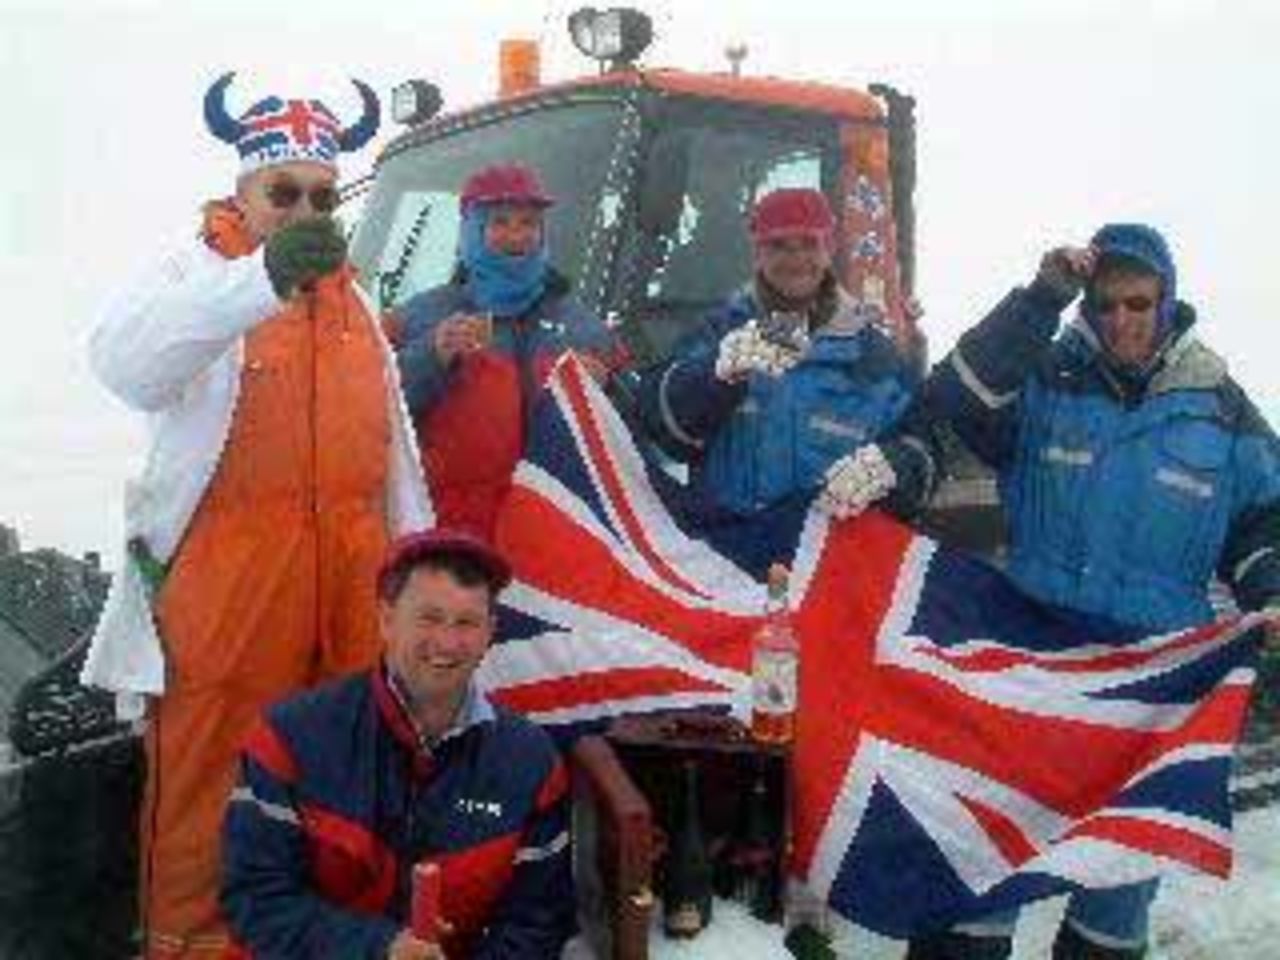 Blowers and the team flying the flag on the glacier, July 2003